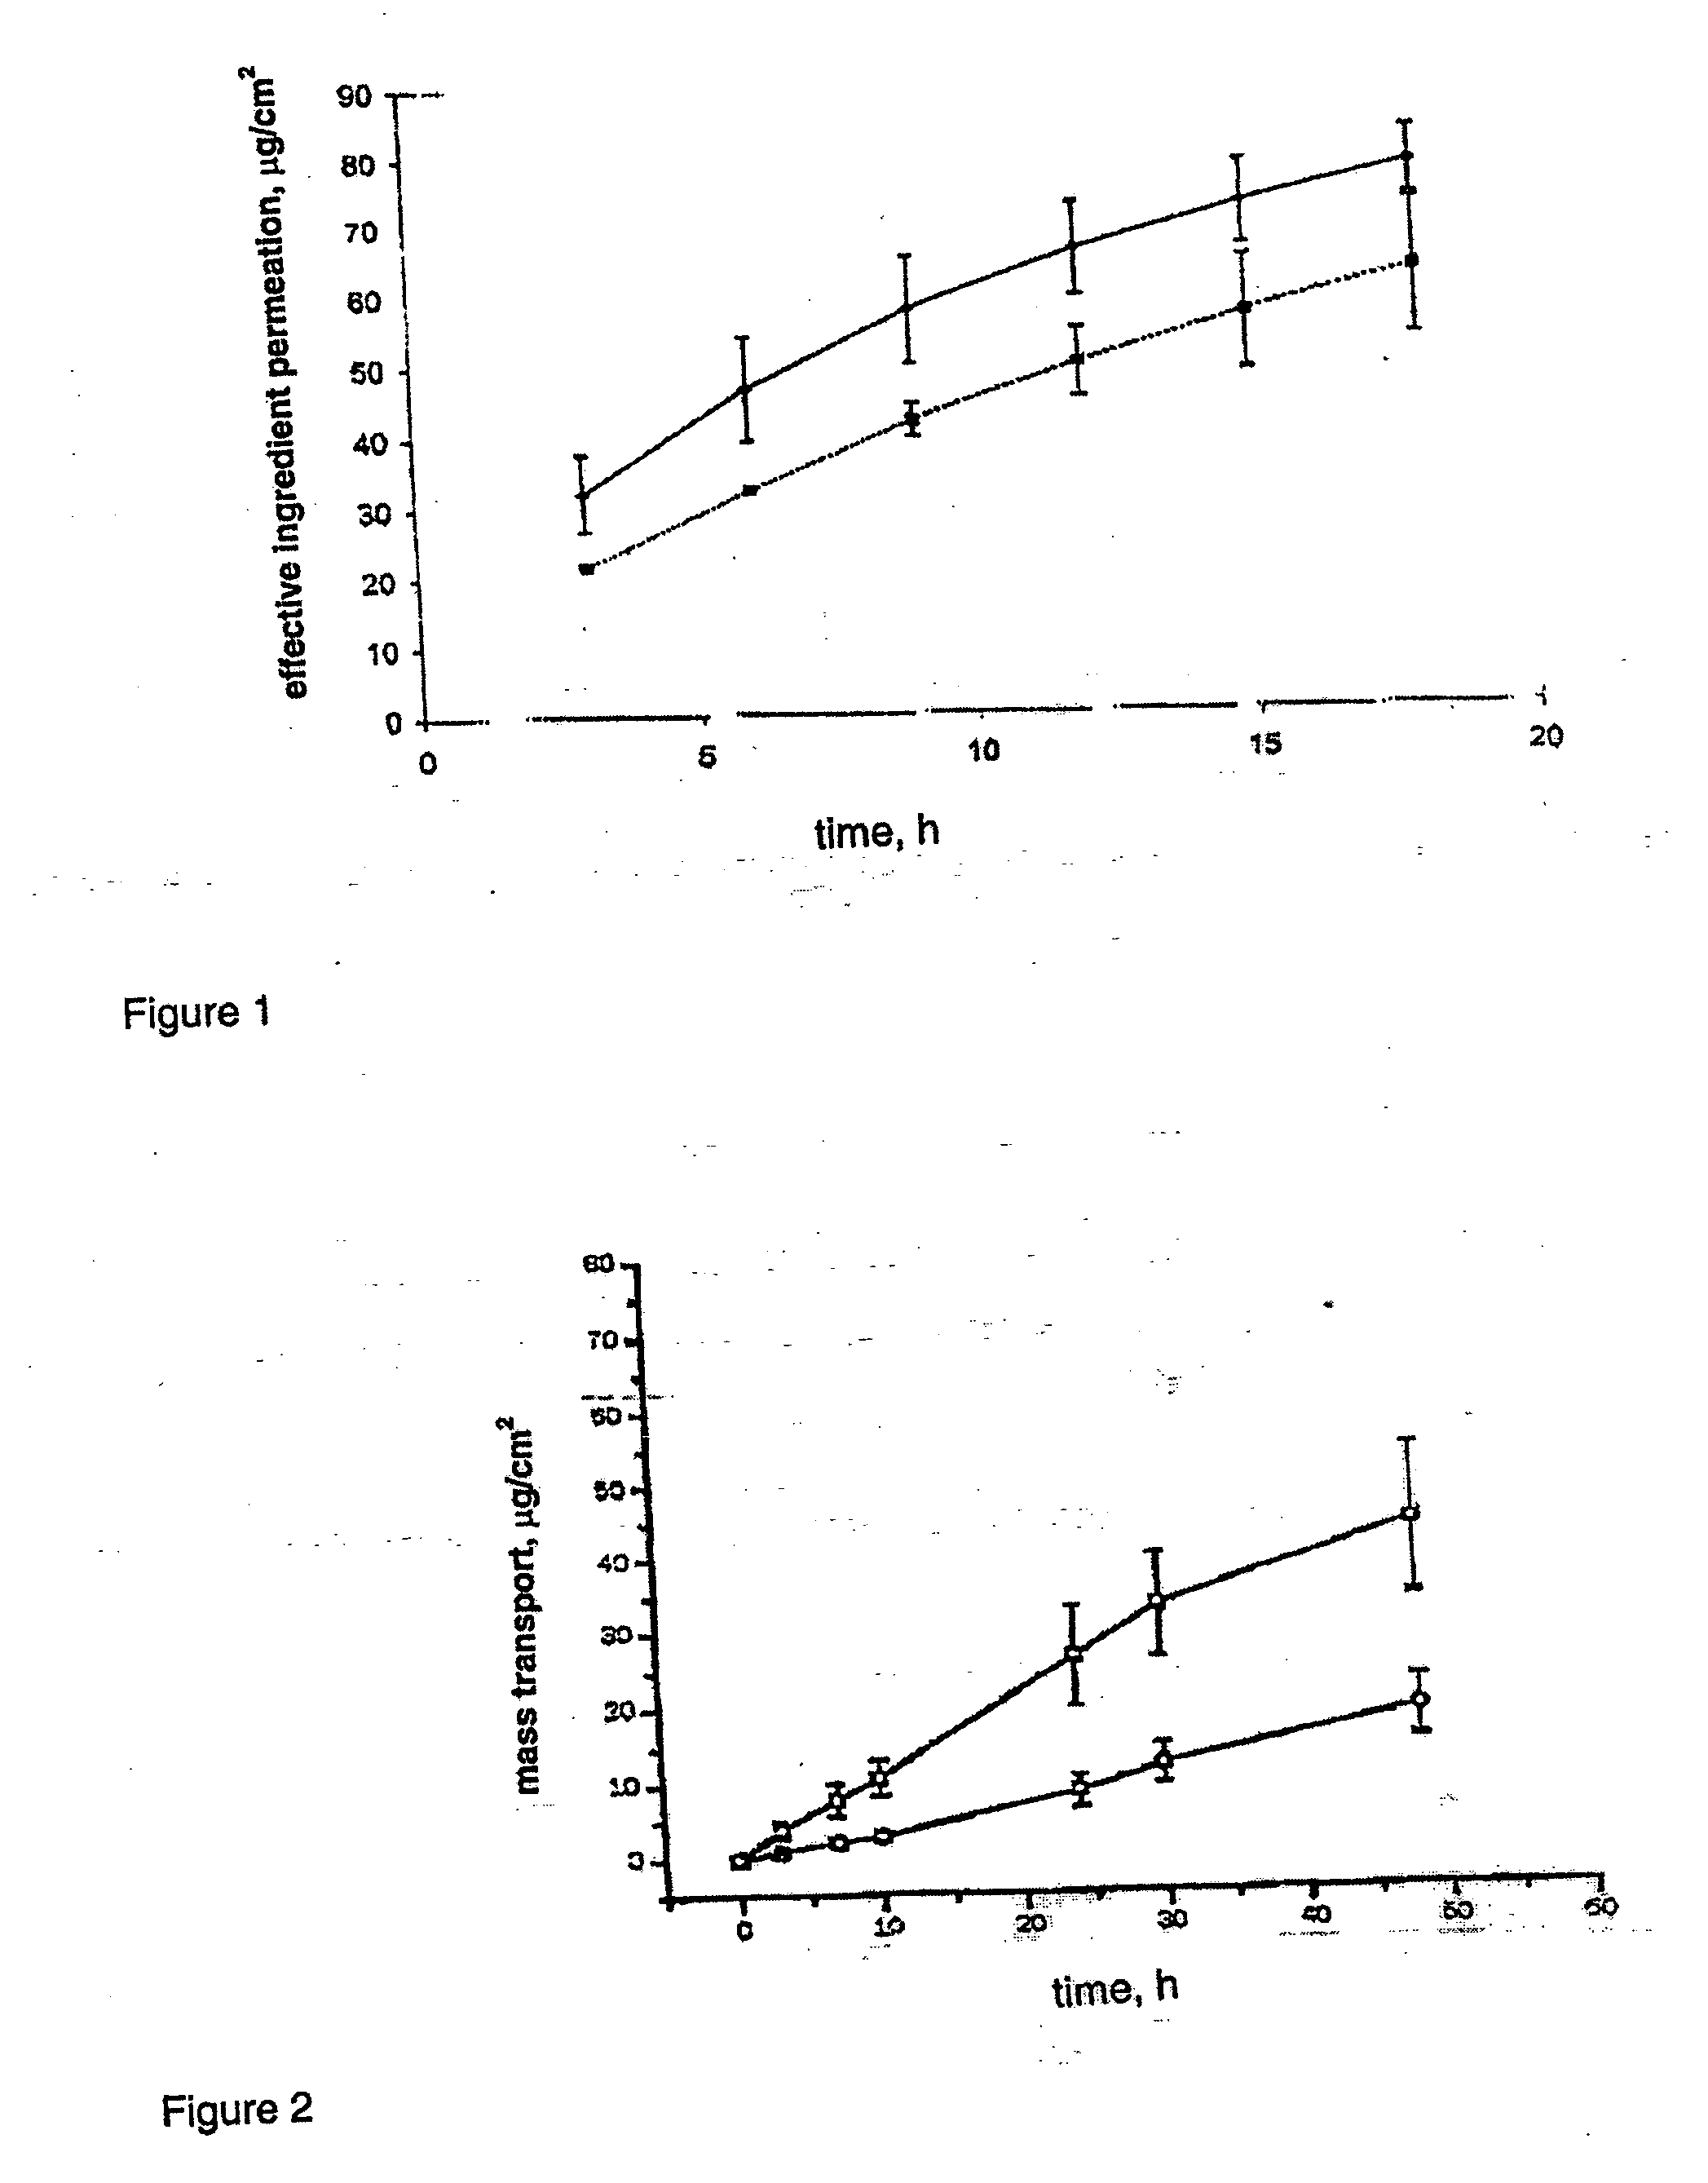 Drospirenone-containing preparations for transdermal use